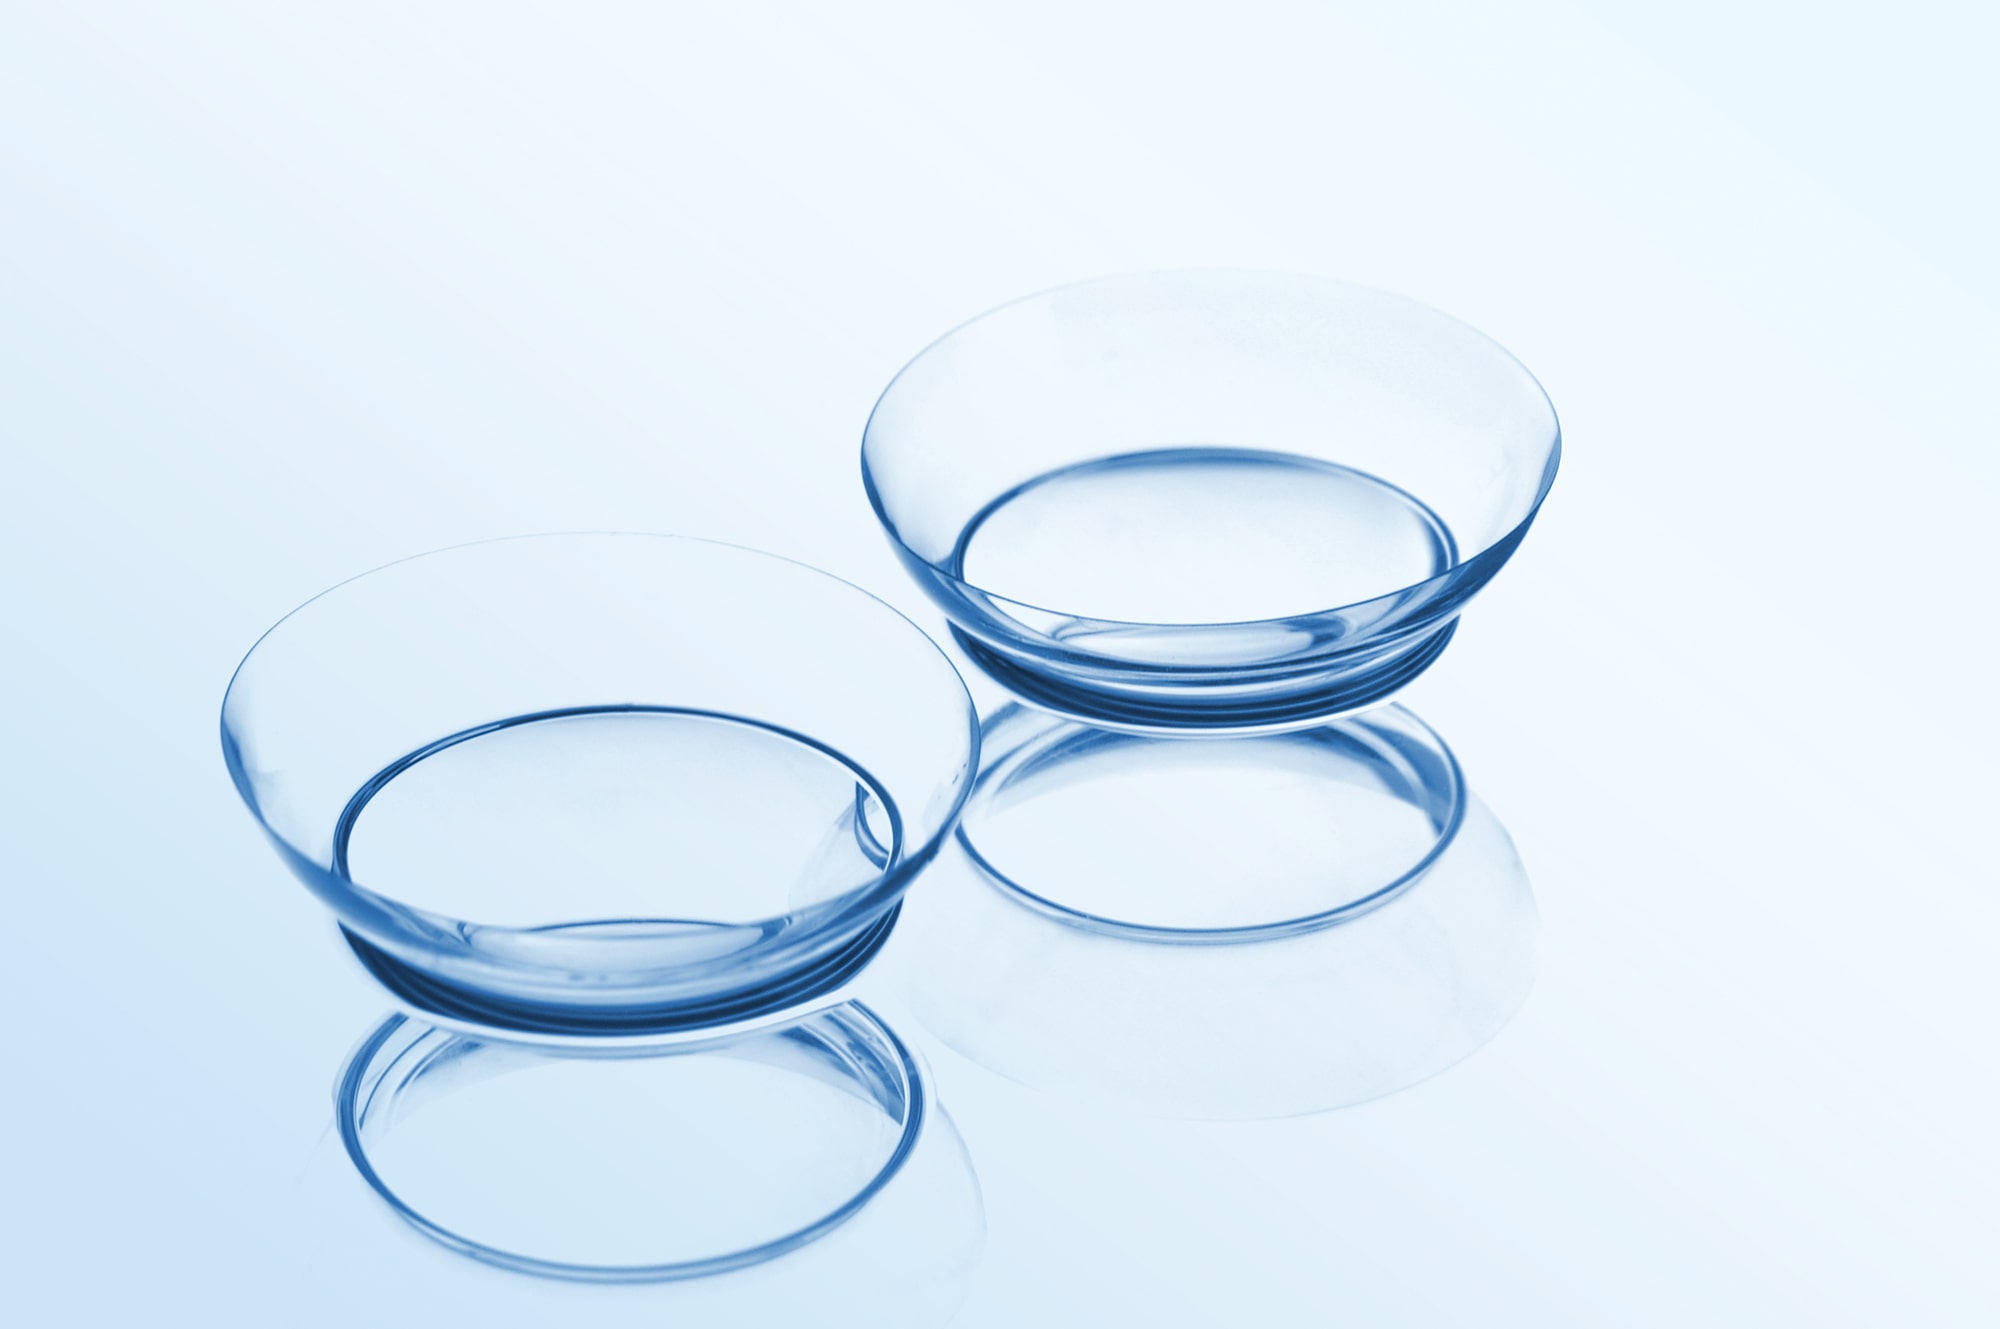 Contact lenses in Envision Eye Care